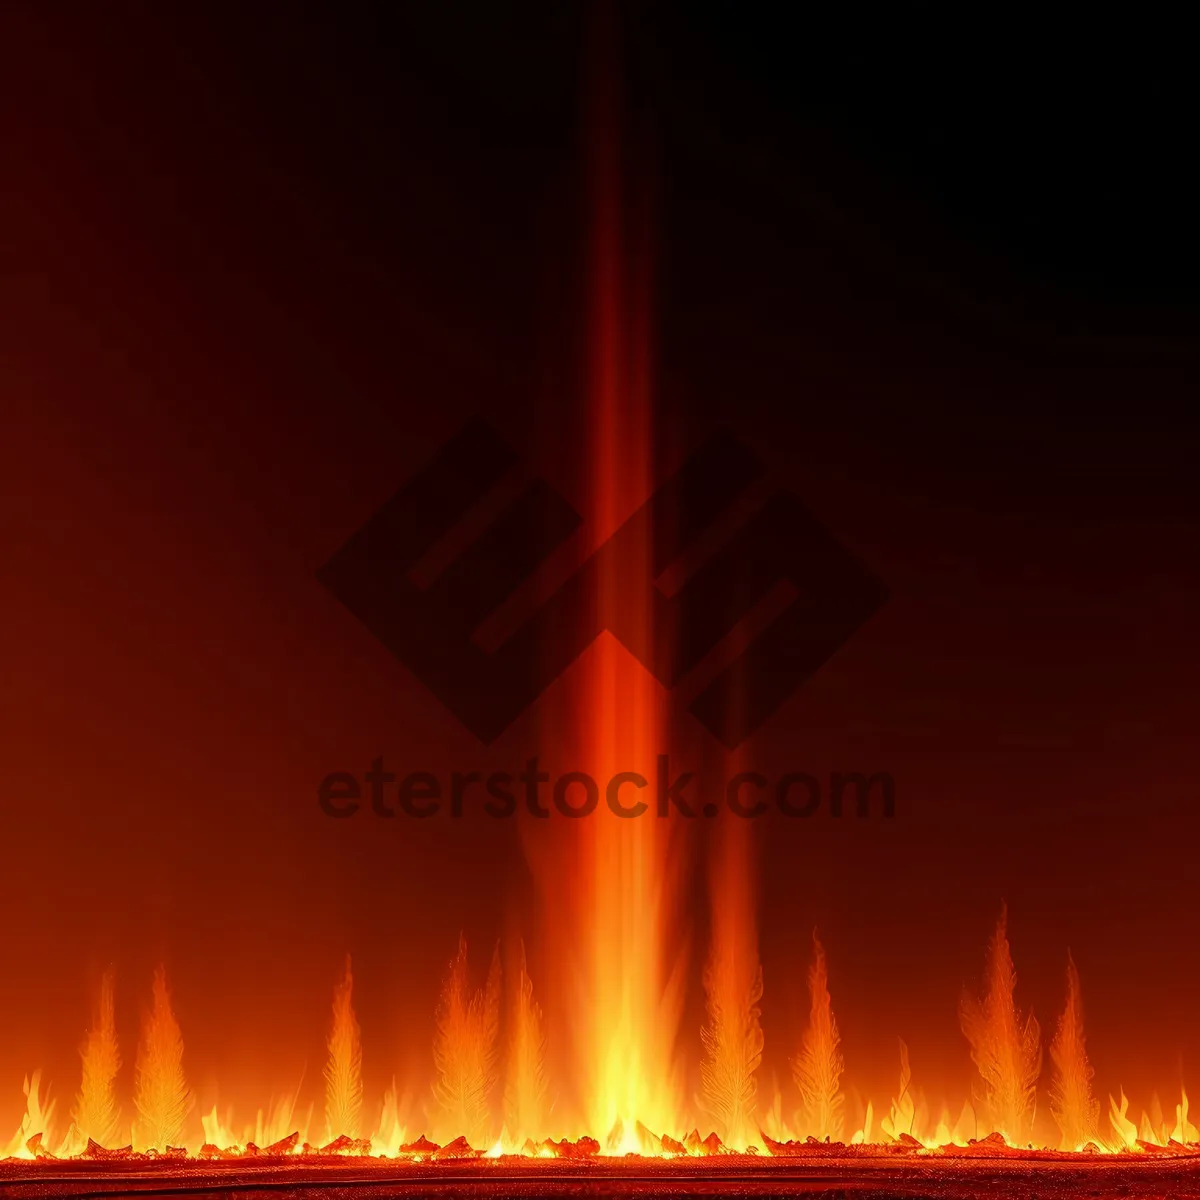 Picture of Blazing Energy: A Fiery, Warm, and Orange-Black Fountain.